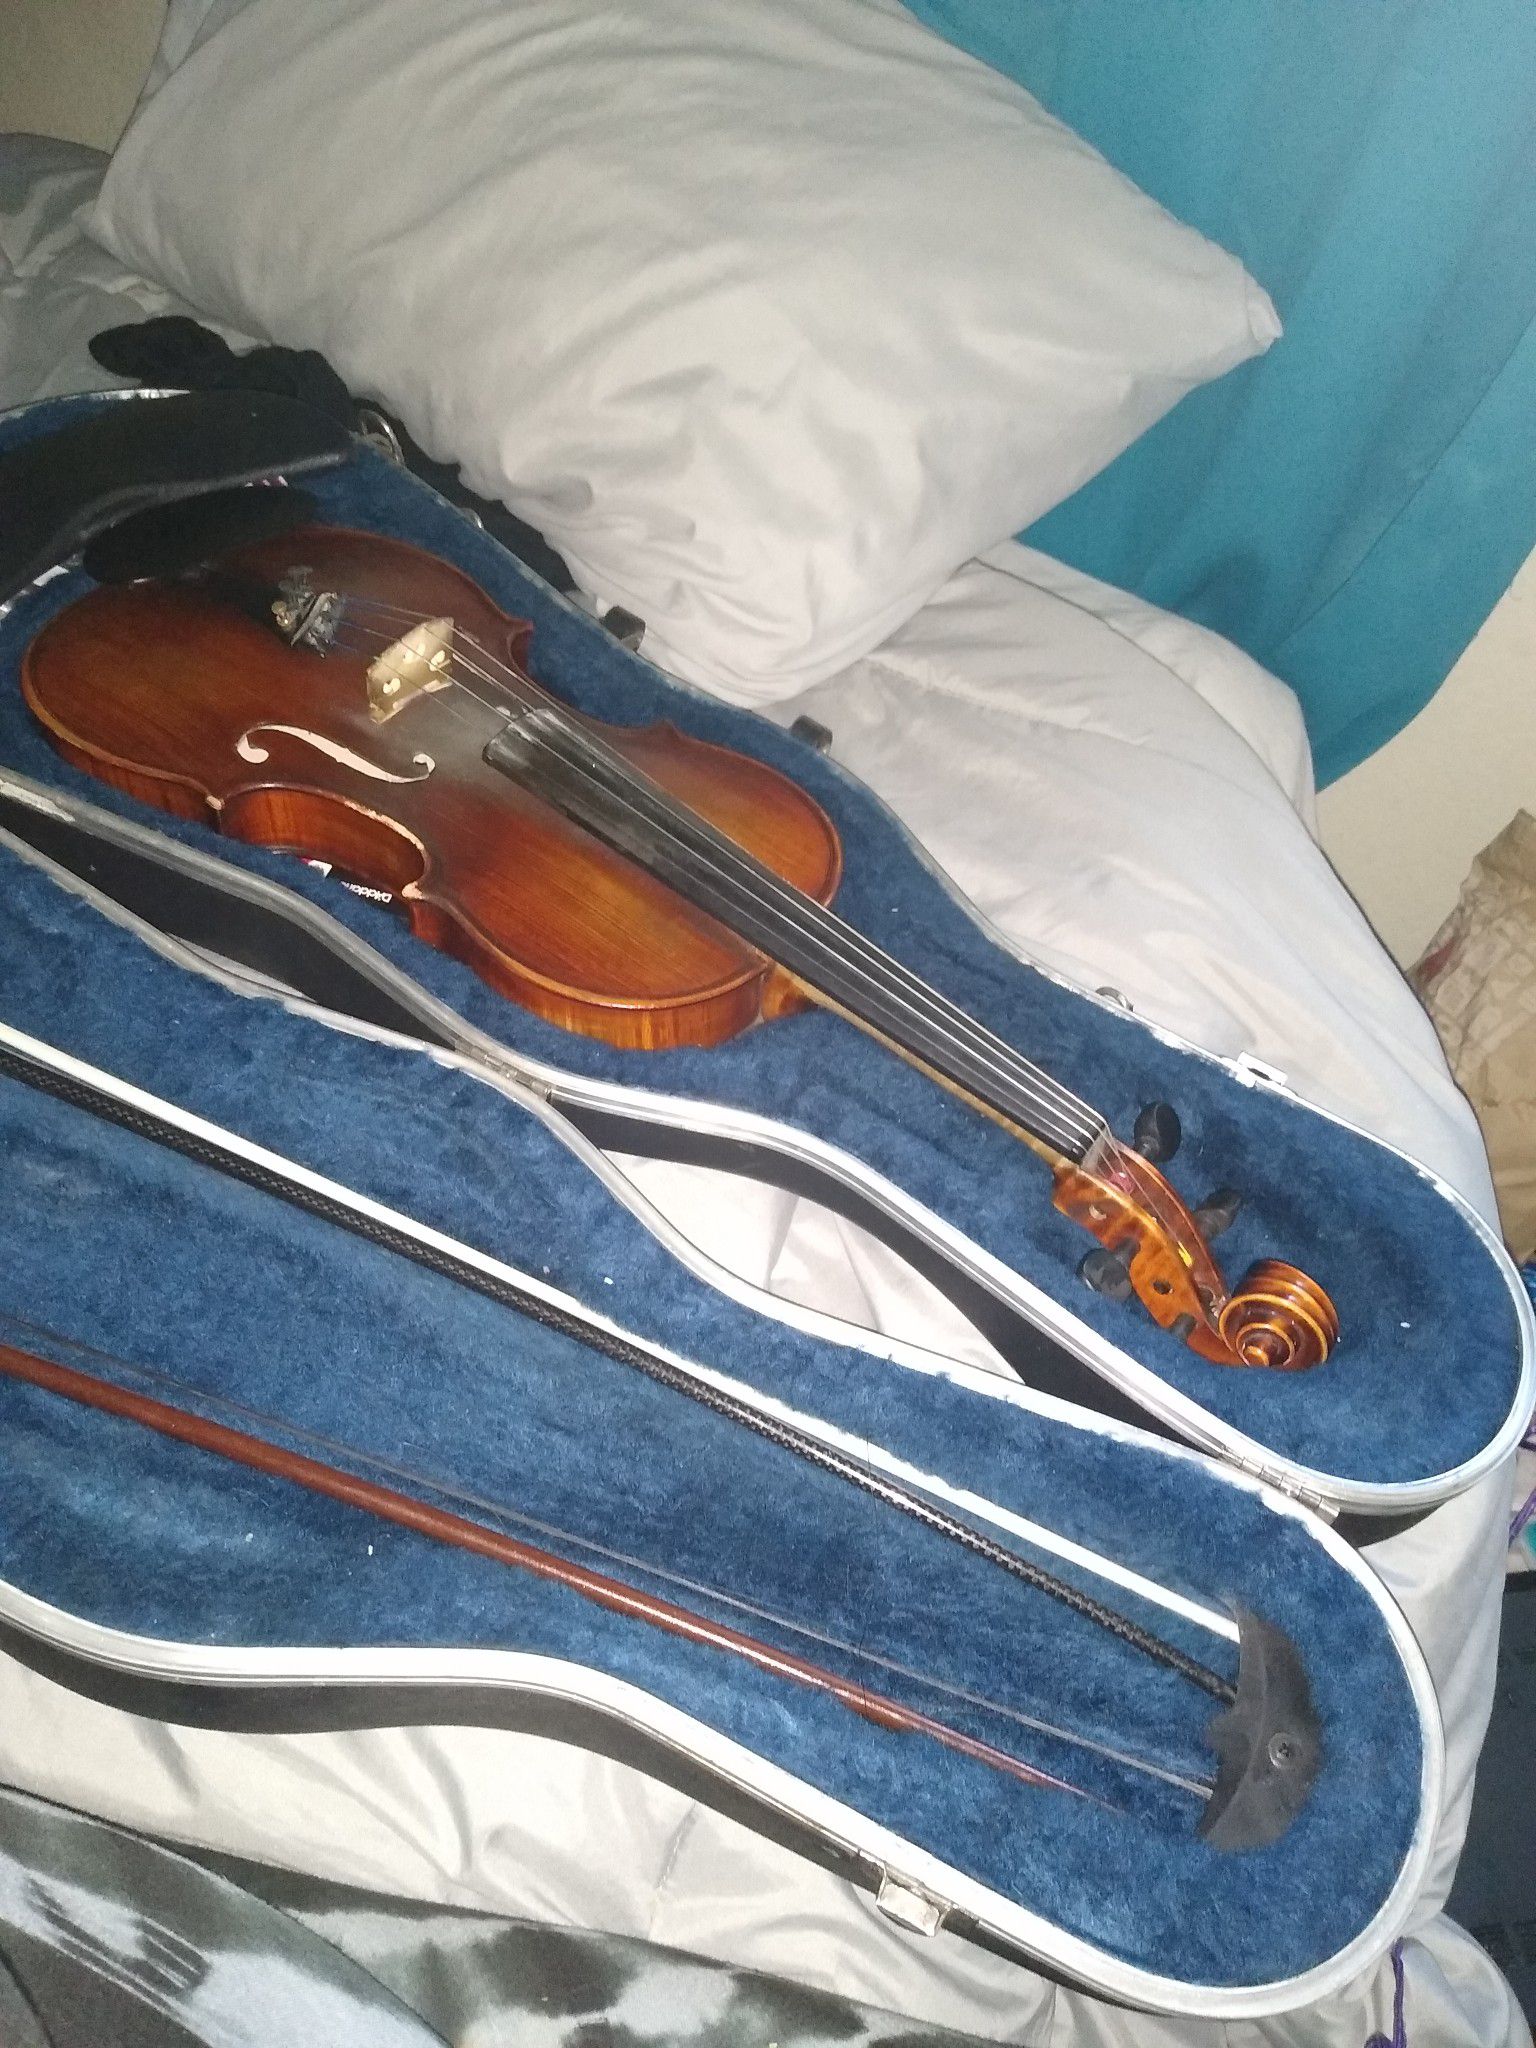 A Karl Wilthelm model 22 4/4 Violin and case and accessories